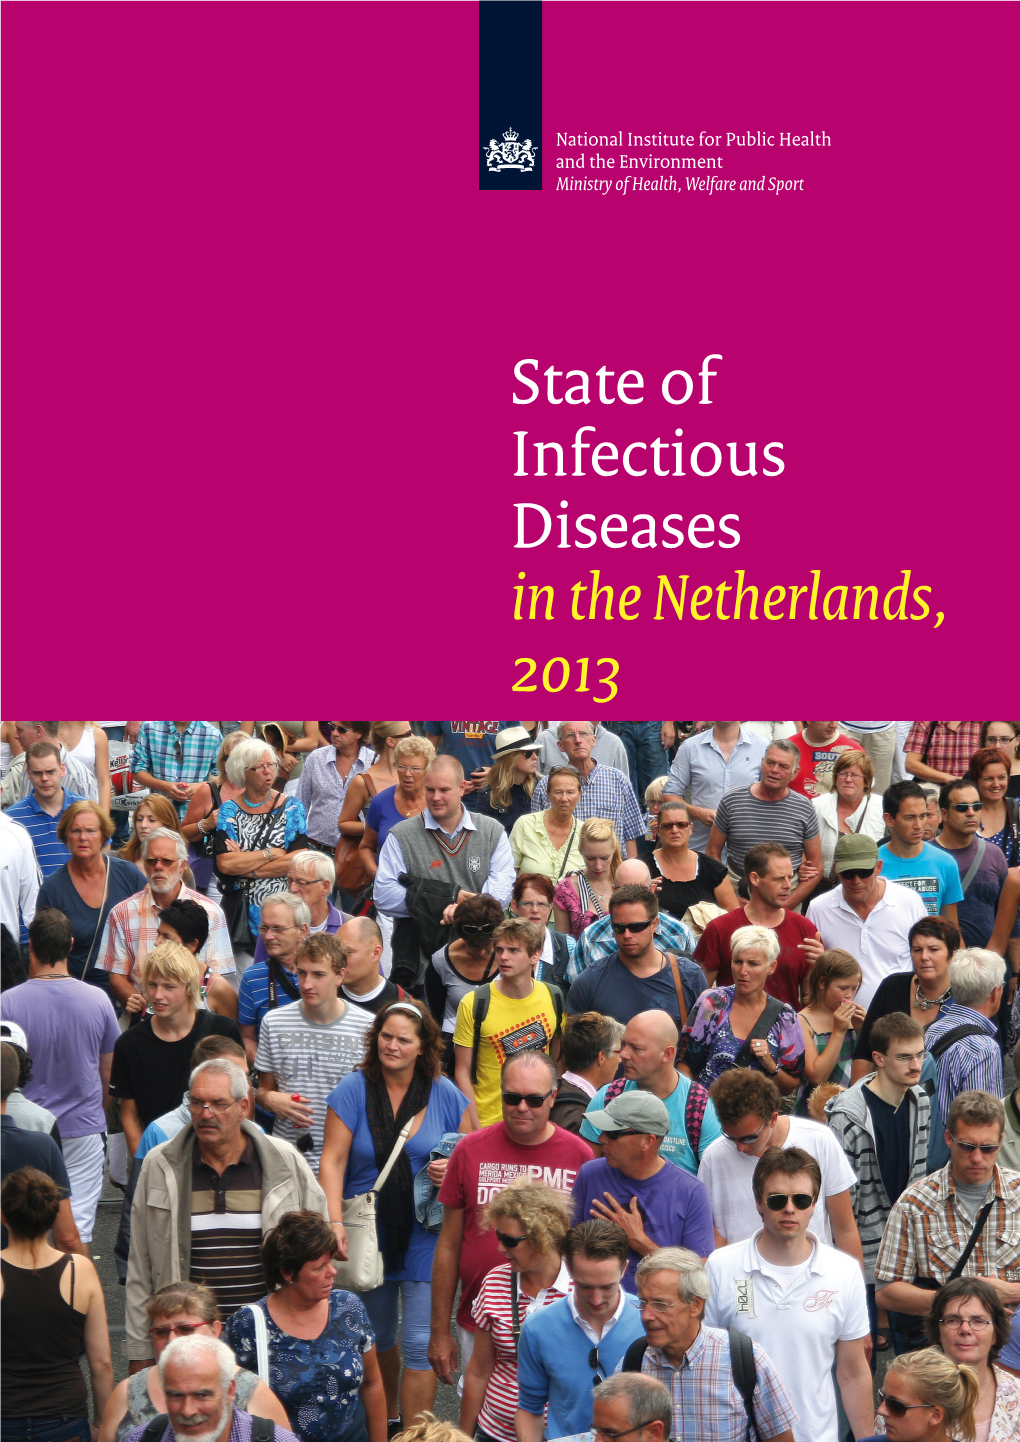 State of Infectious Diseases in the Netherlands, 2013